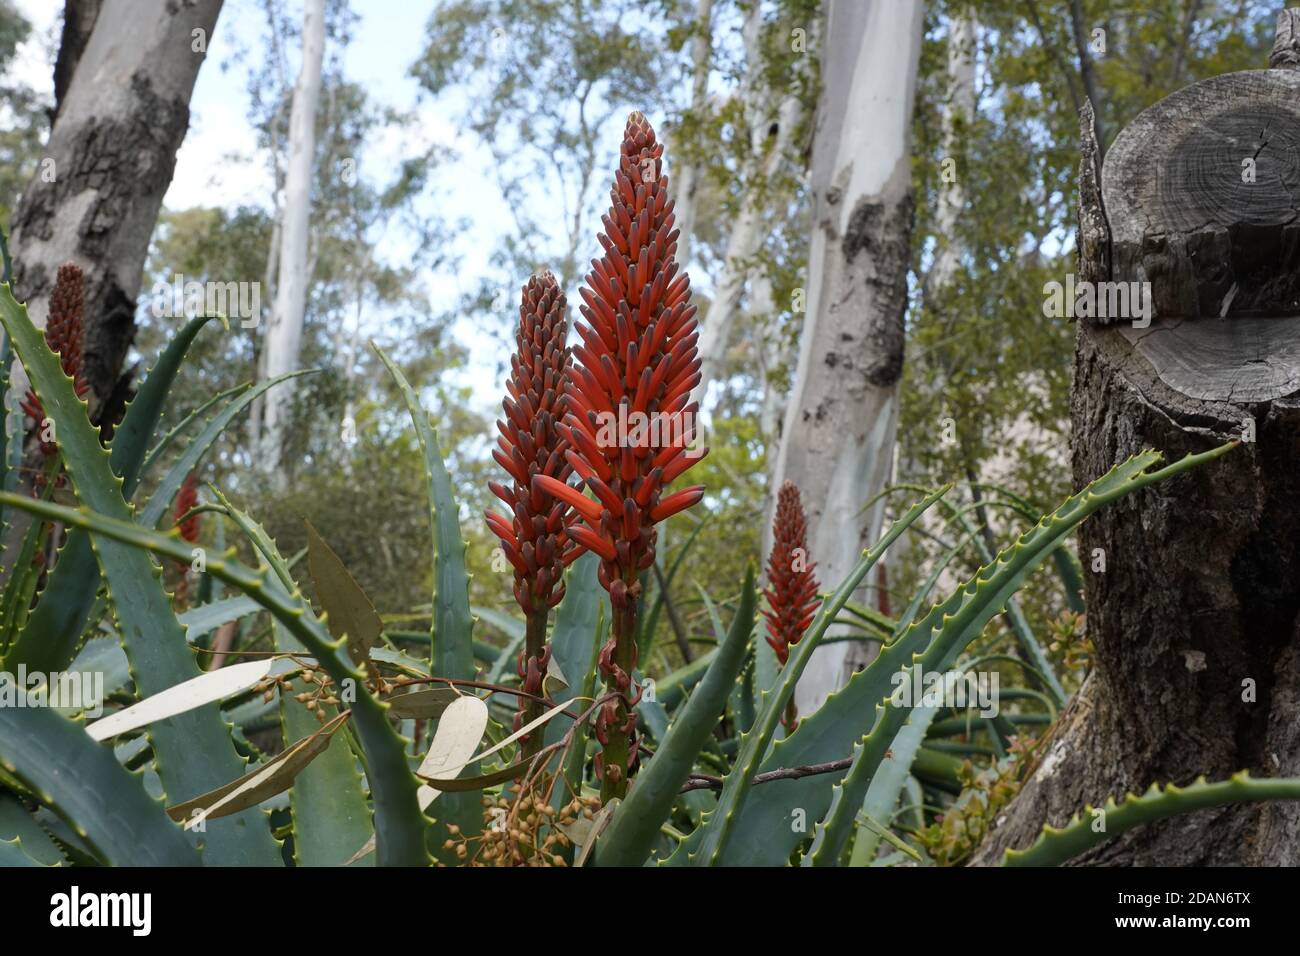 succulent aloes bright red poker like flowers Stock Photo